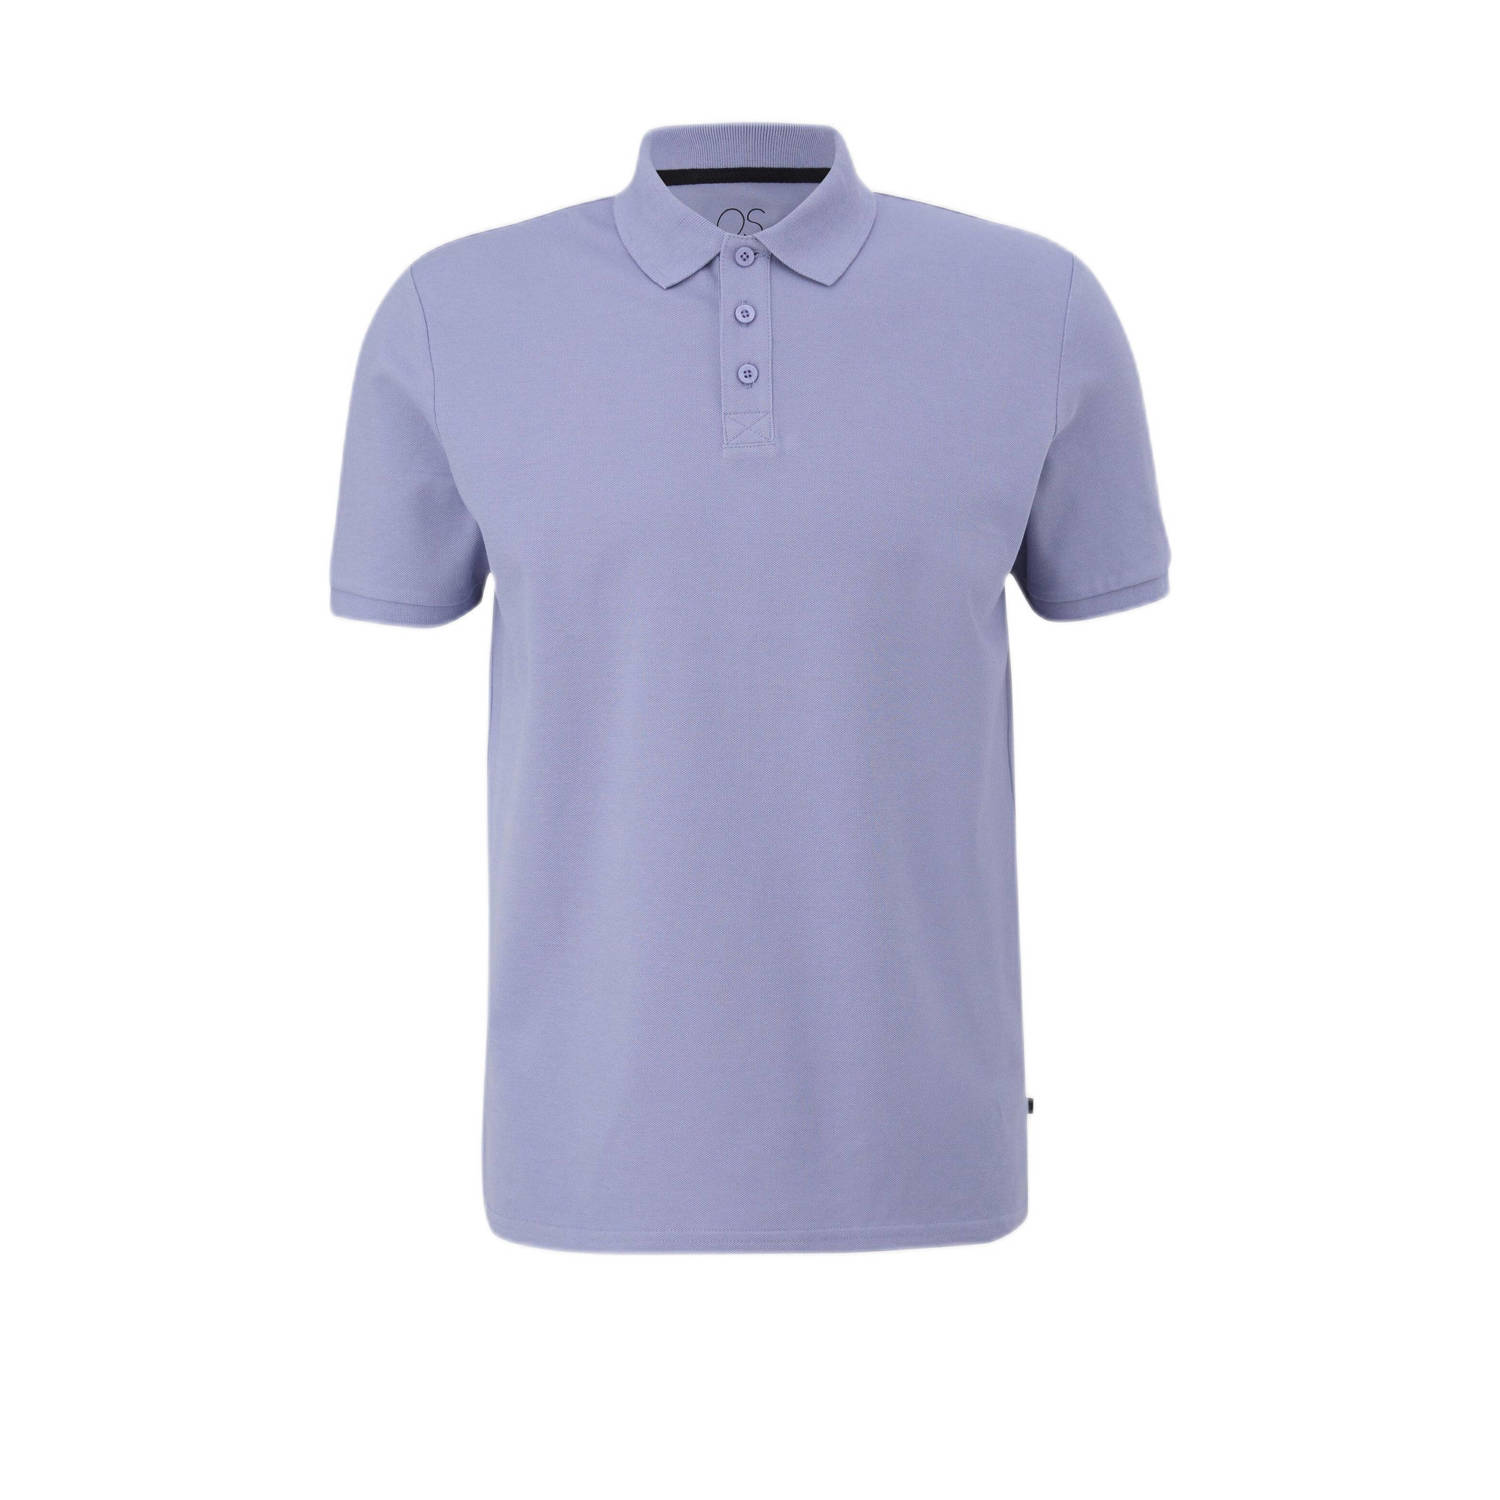 Q S by s.Oliver regular fit polo violet